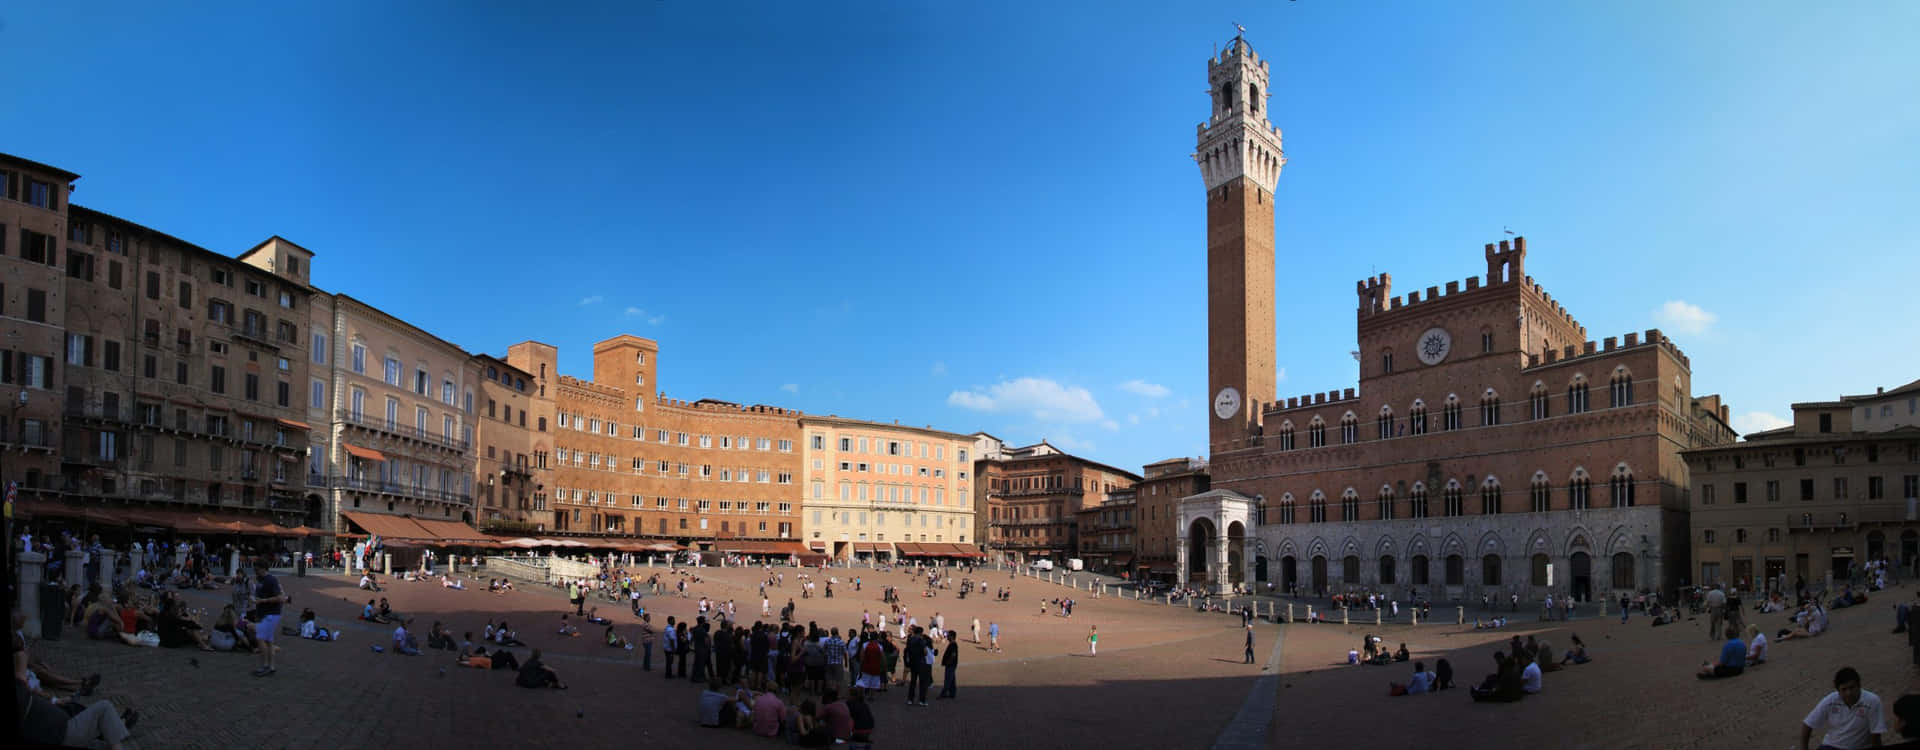 Siena Pubblico Palace And Tower Of Mangja Wallpaper